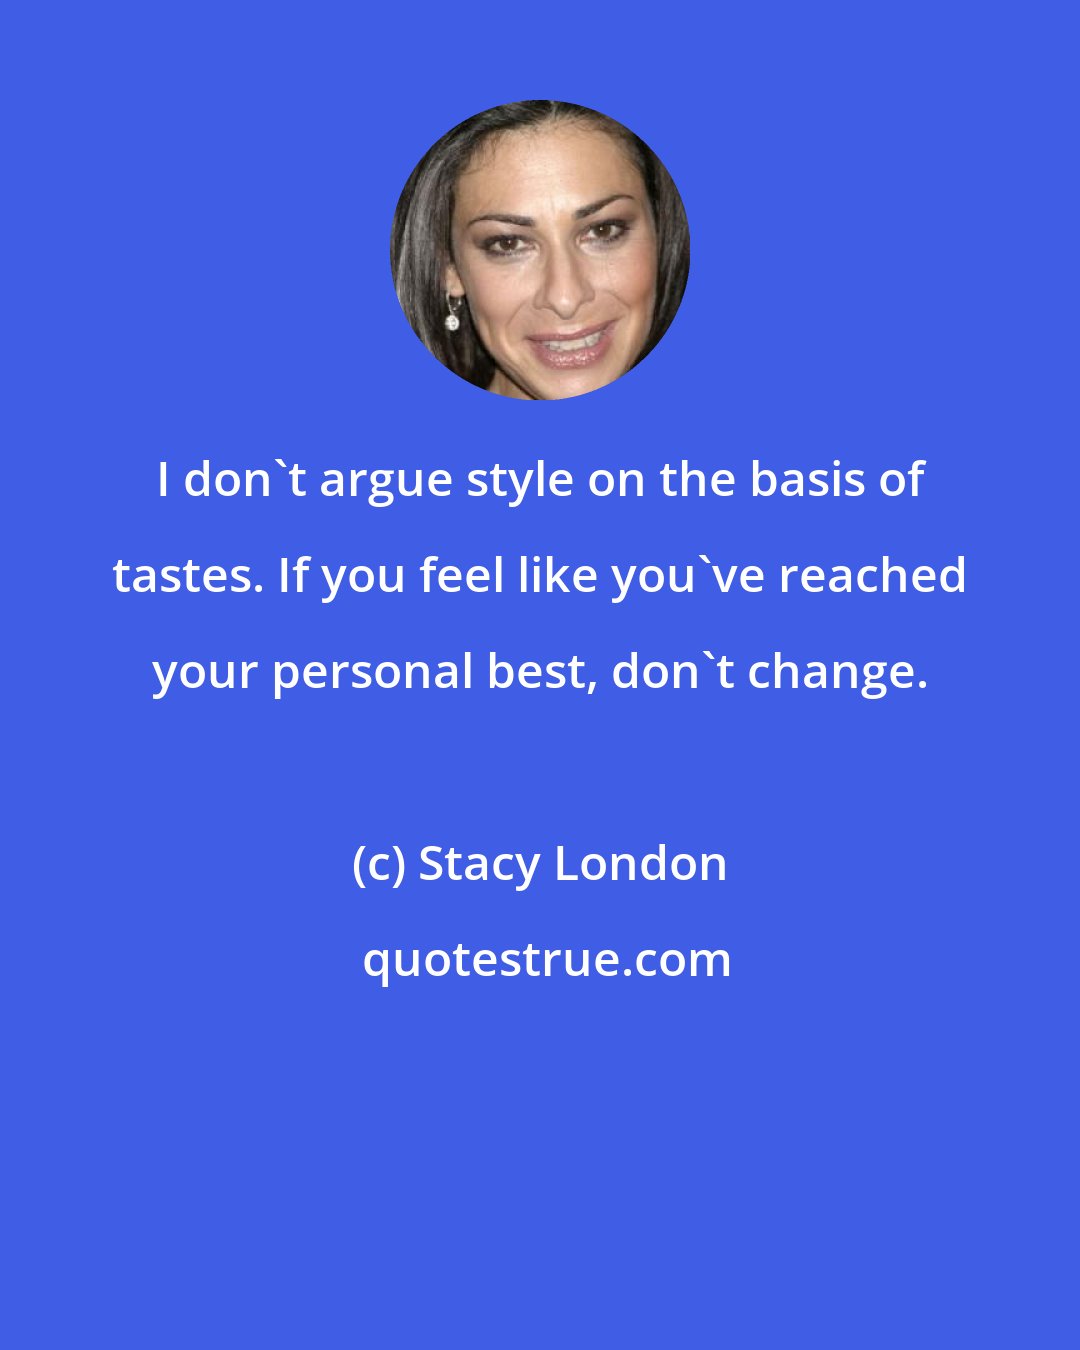 Stacy London: I don't argue style on the basis of tastes. If you feel like you've reached your personal best, don't change.